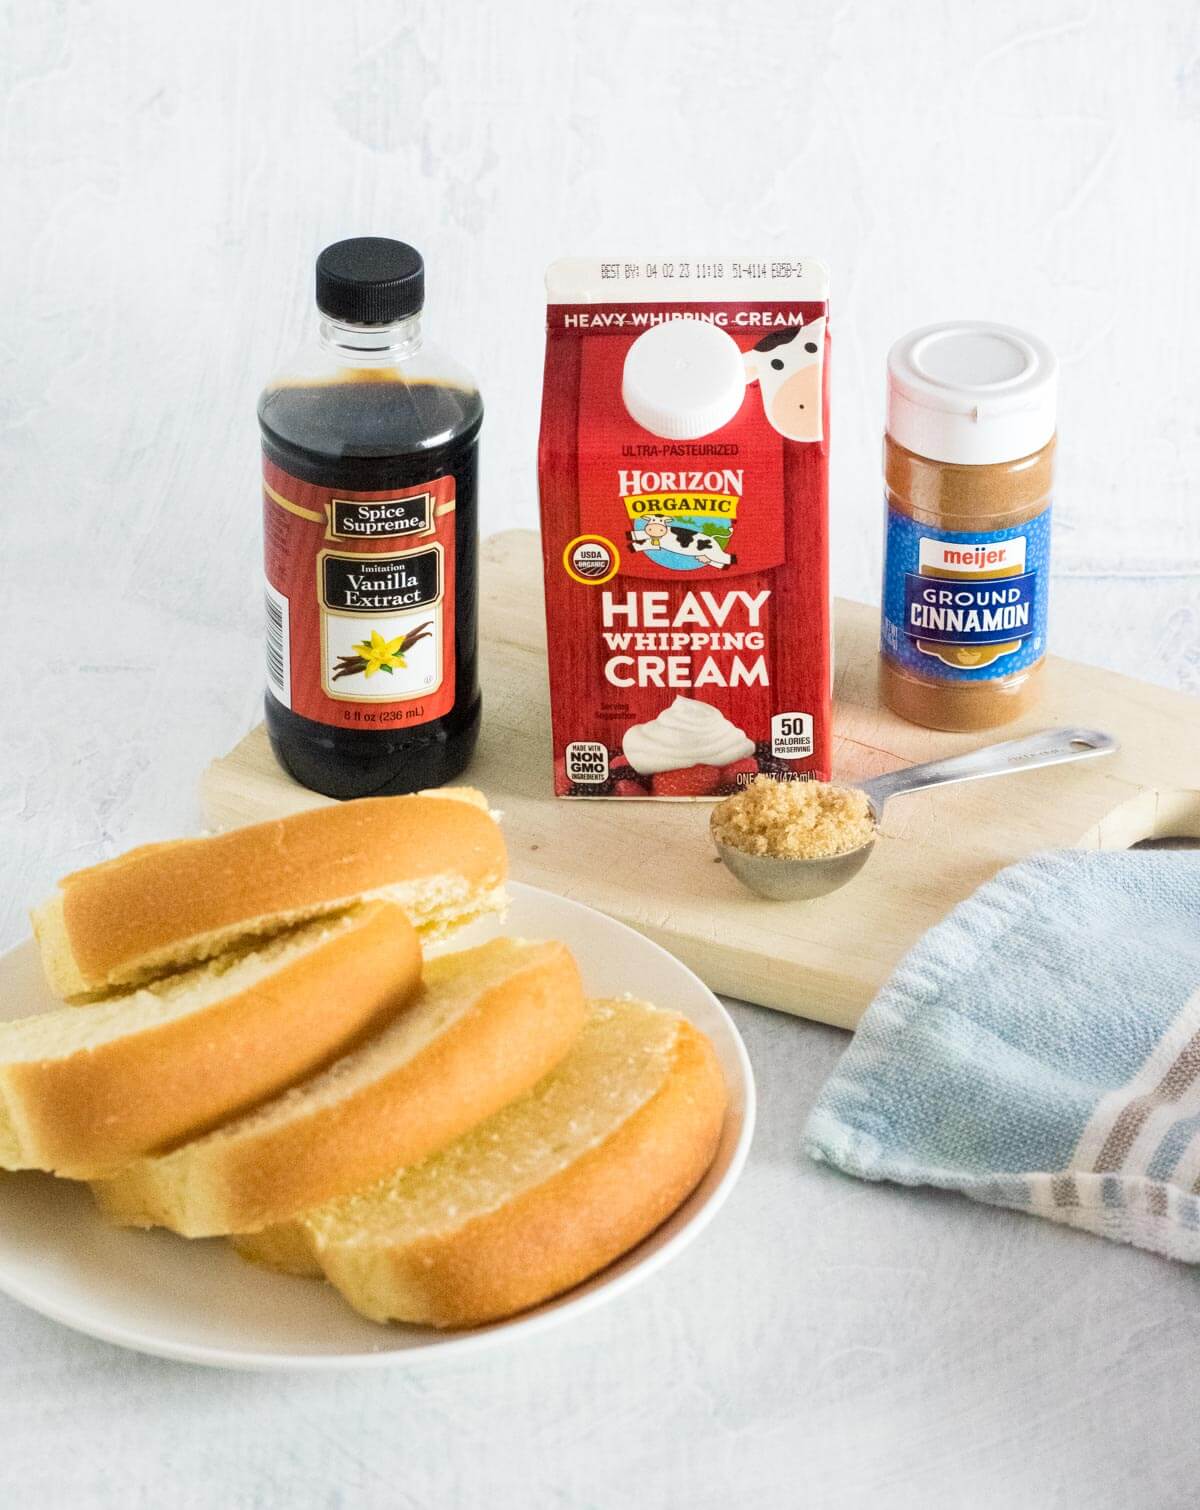 Eggless French toast ingredients.